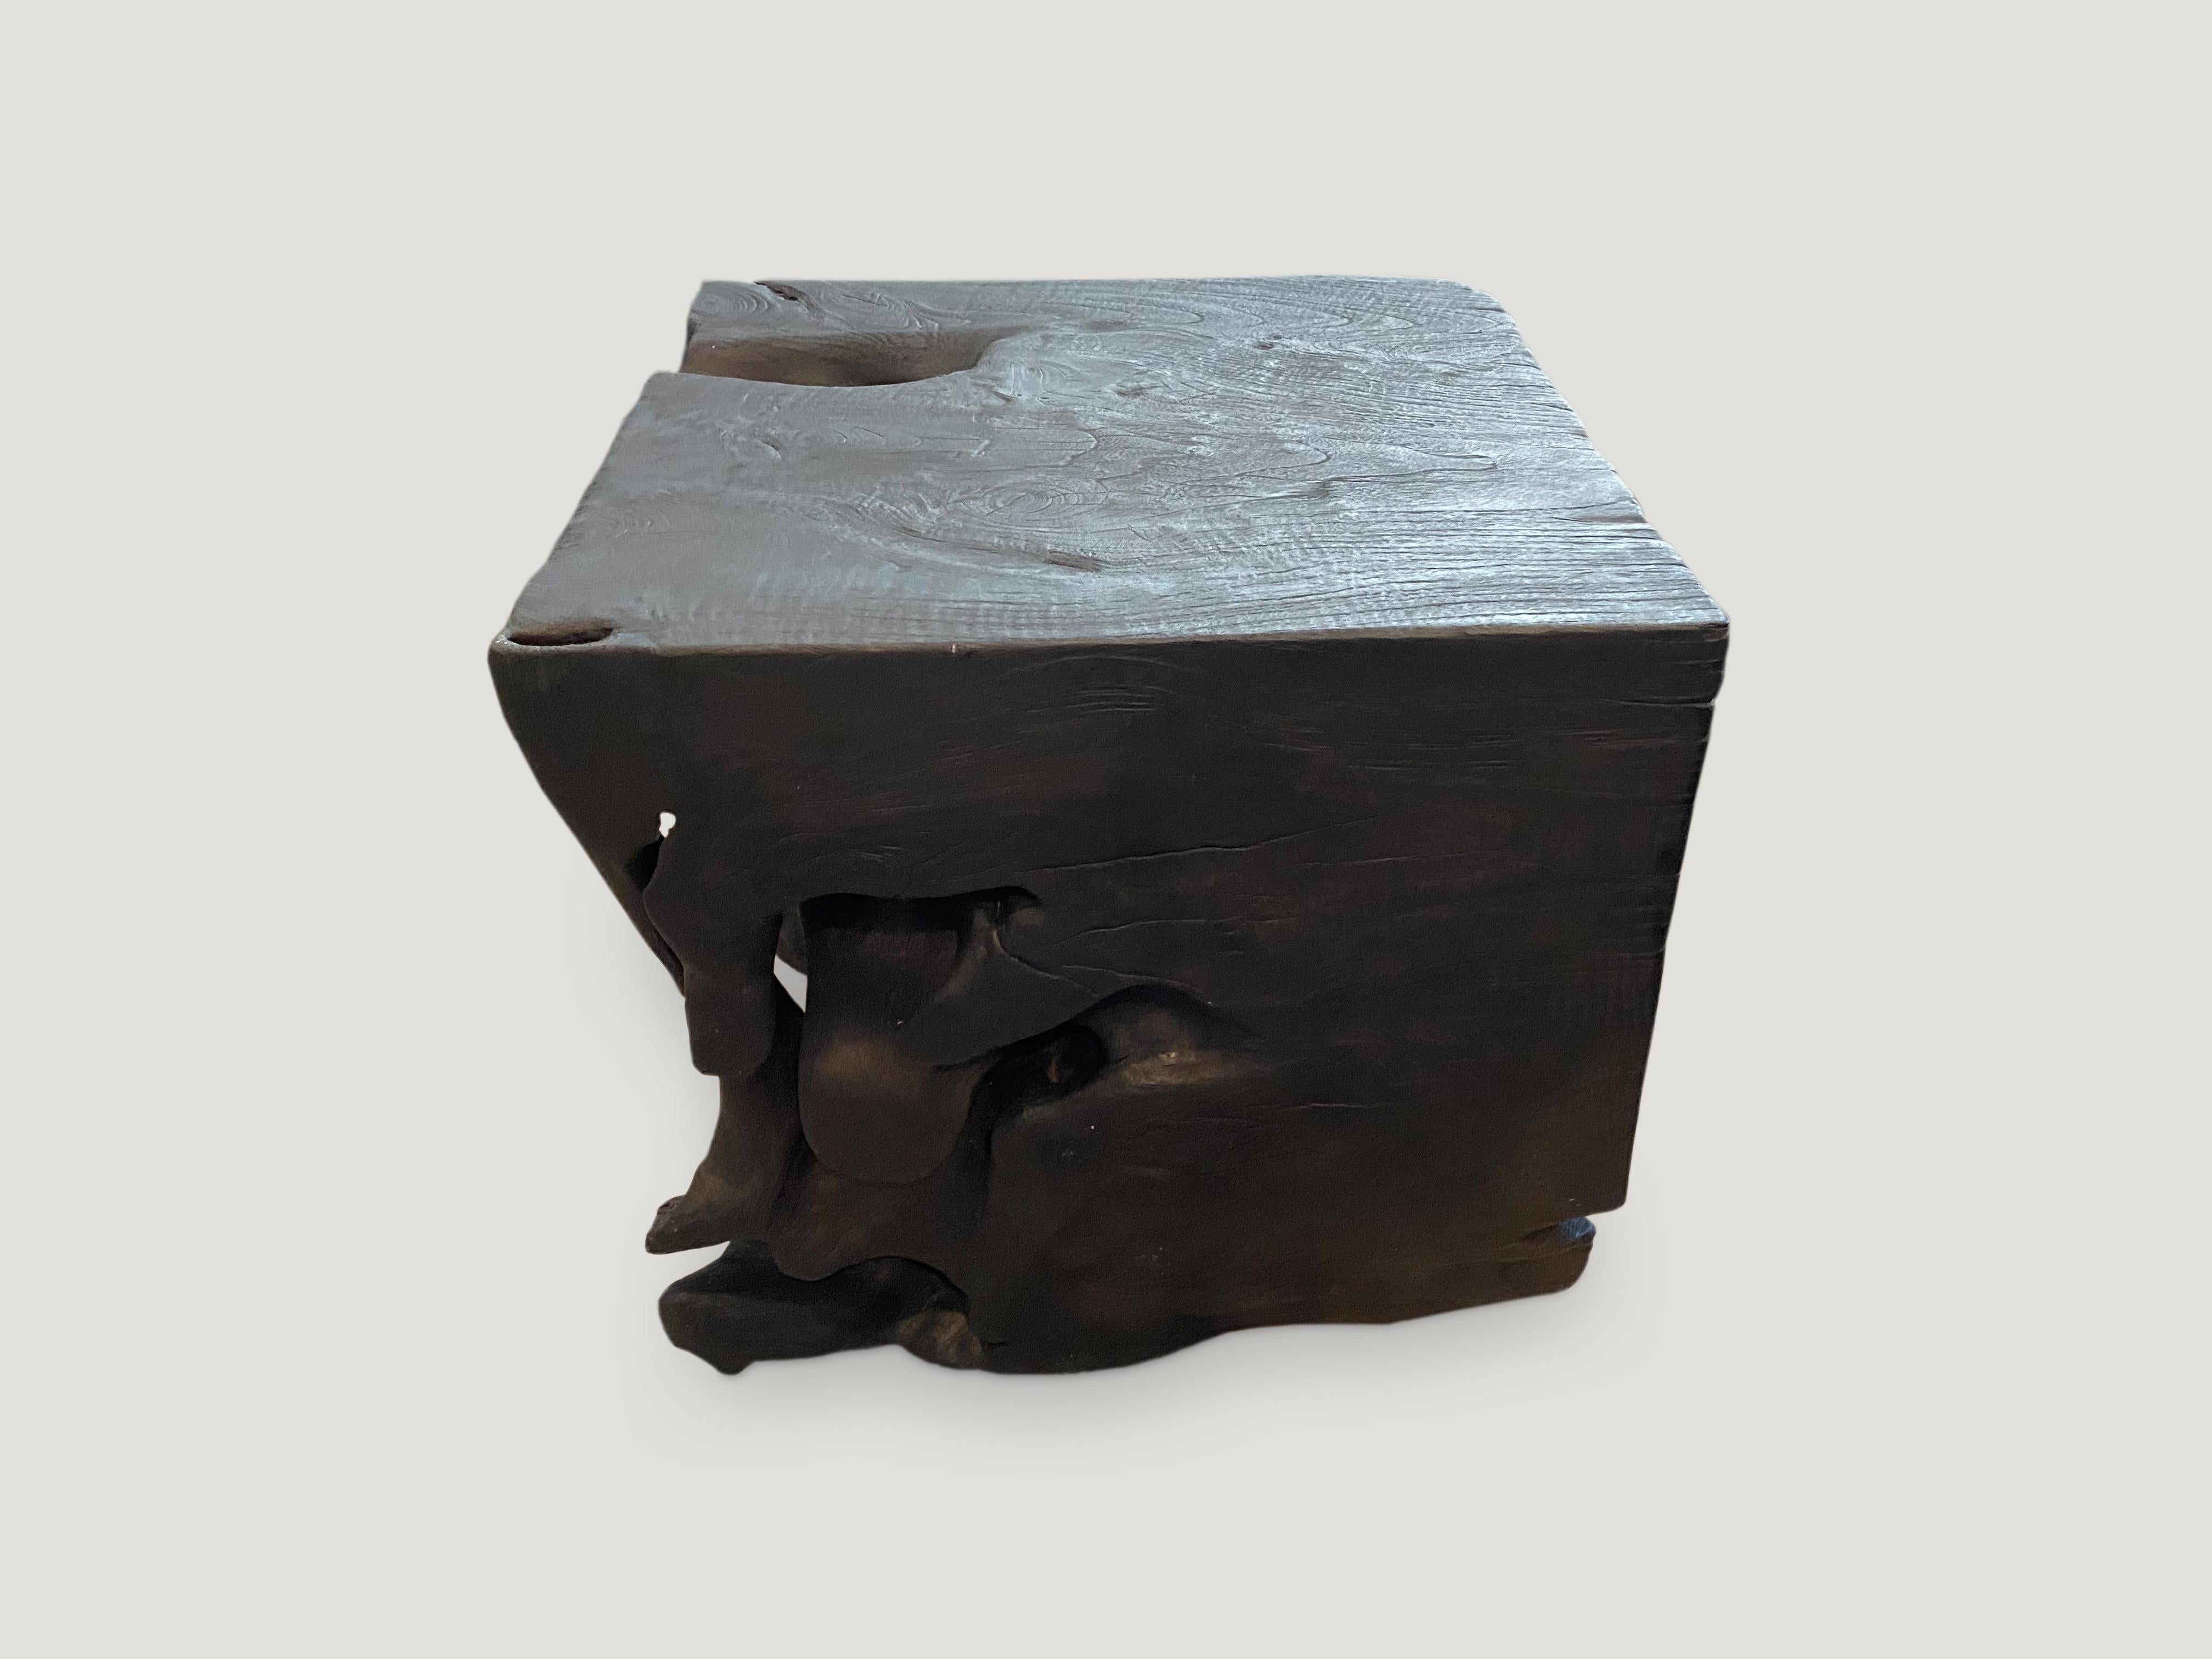 Sculptural organic reclaimed teak side table or stool. Burnt, sanded and sealed with a smooth finish exposing the beautiful grain of the wood. Organic is the new modern.

The Triple Burnt collection represents a unique line of modern furniture